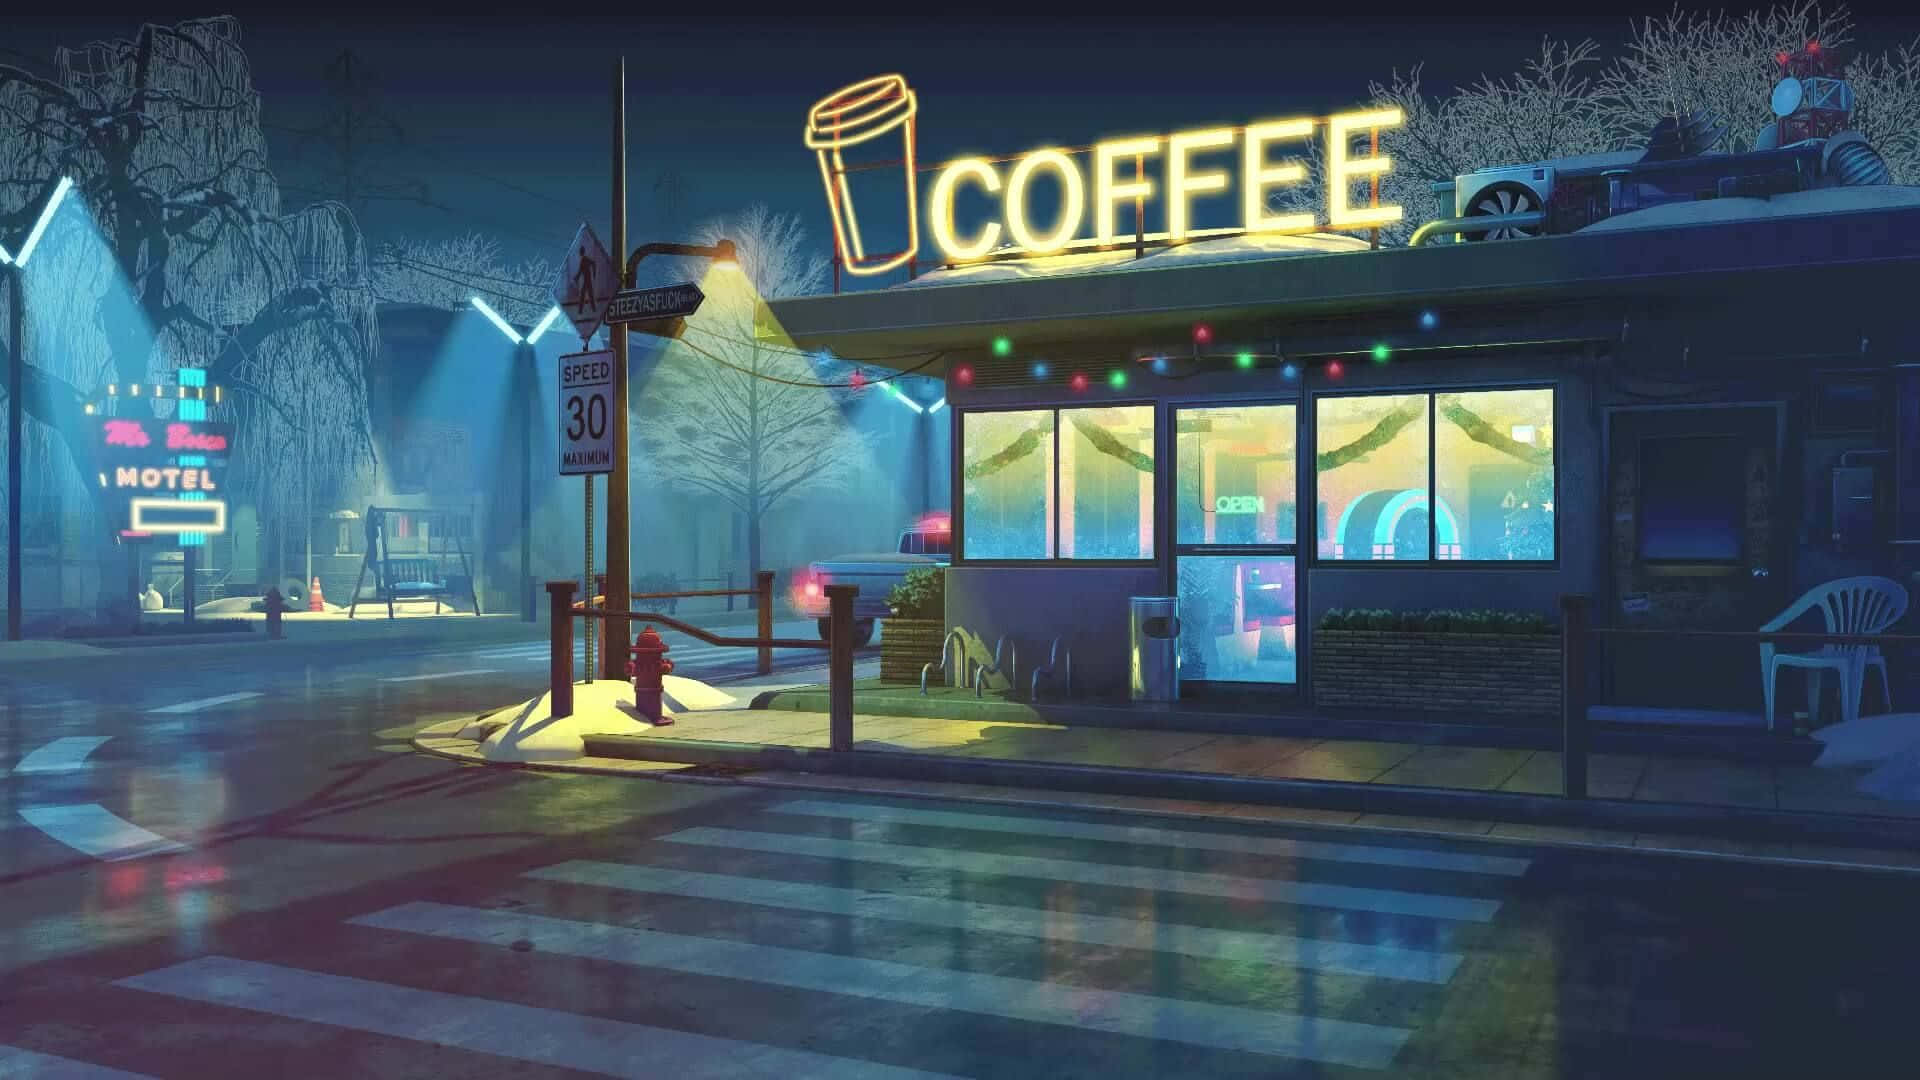 A Neon Coffee Shop With A Sign On It